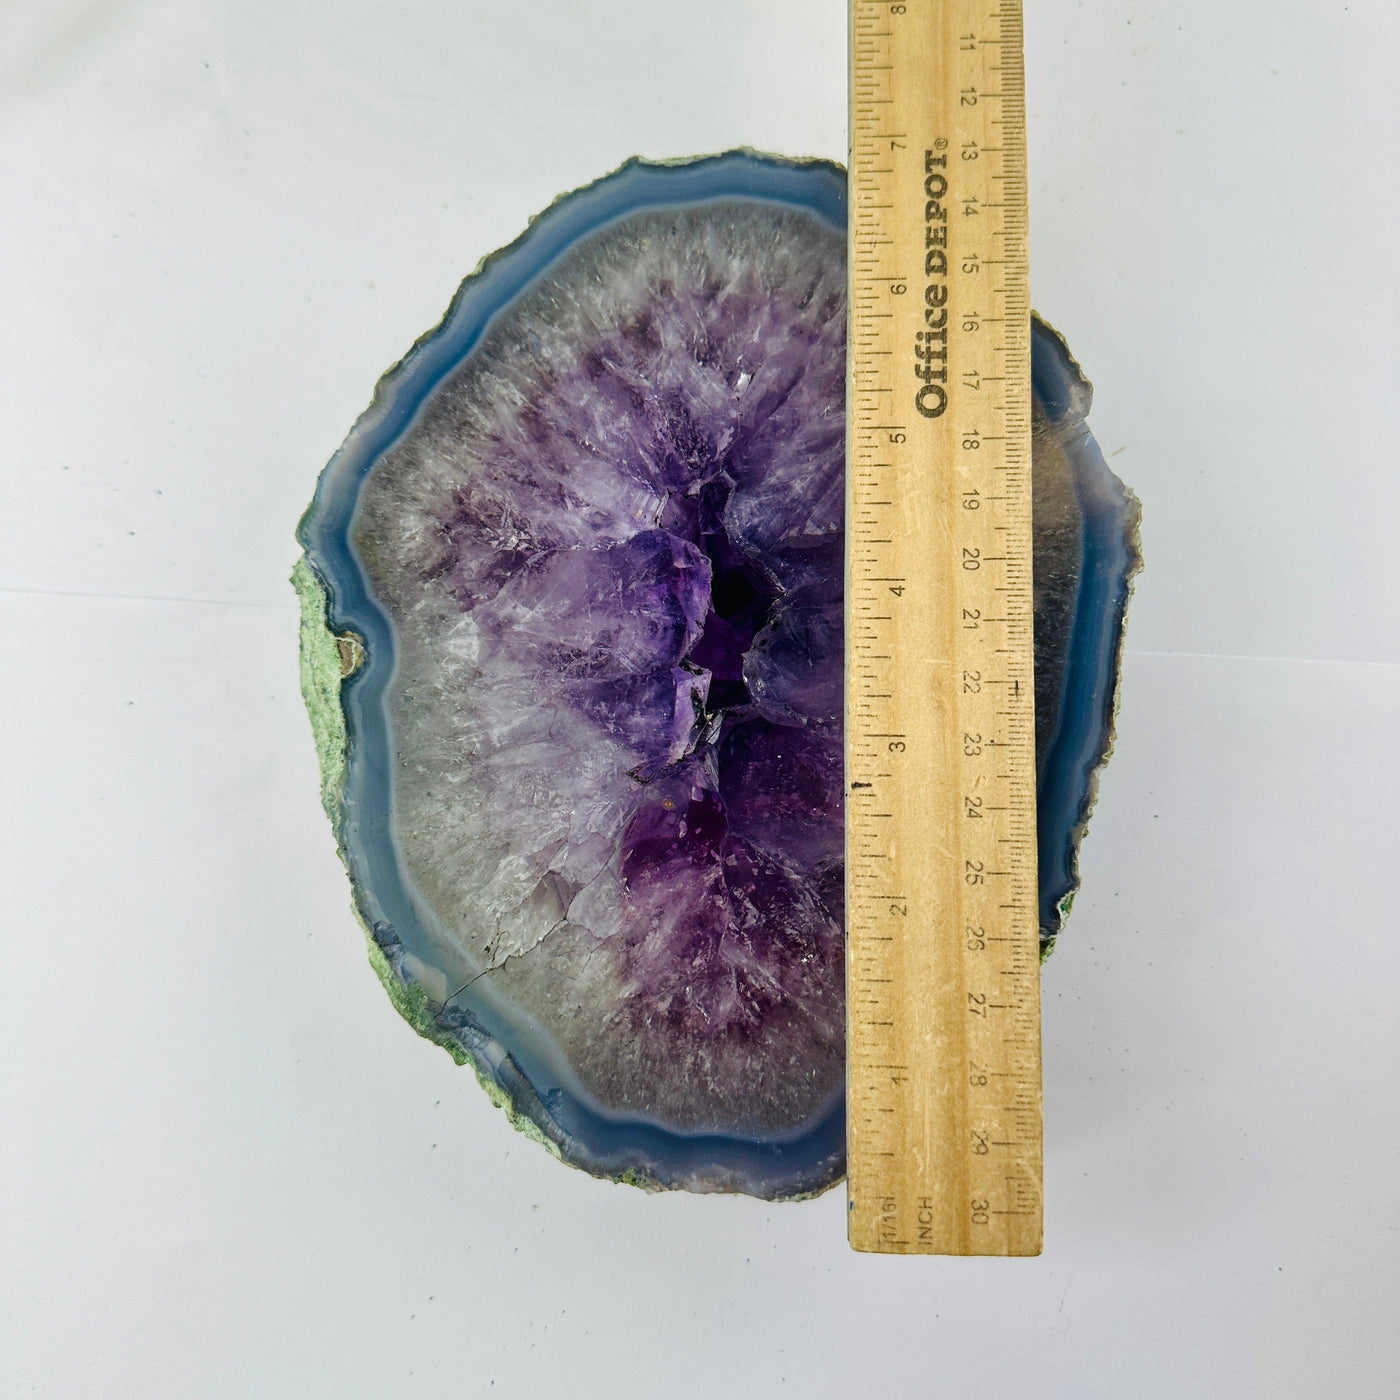  Amethyst Slice Crystal Portal - OOAK top view with ruler for size reference